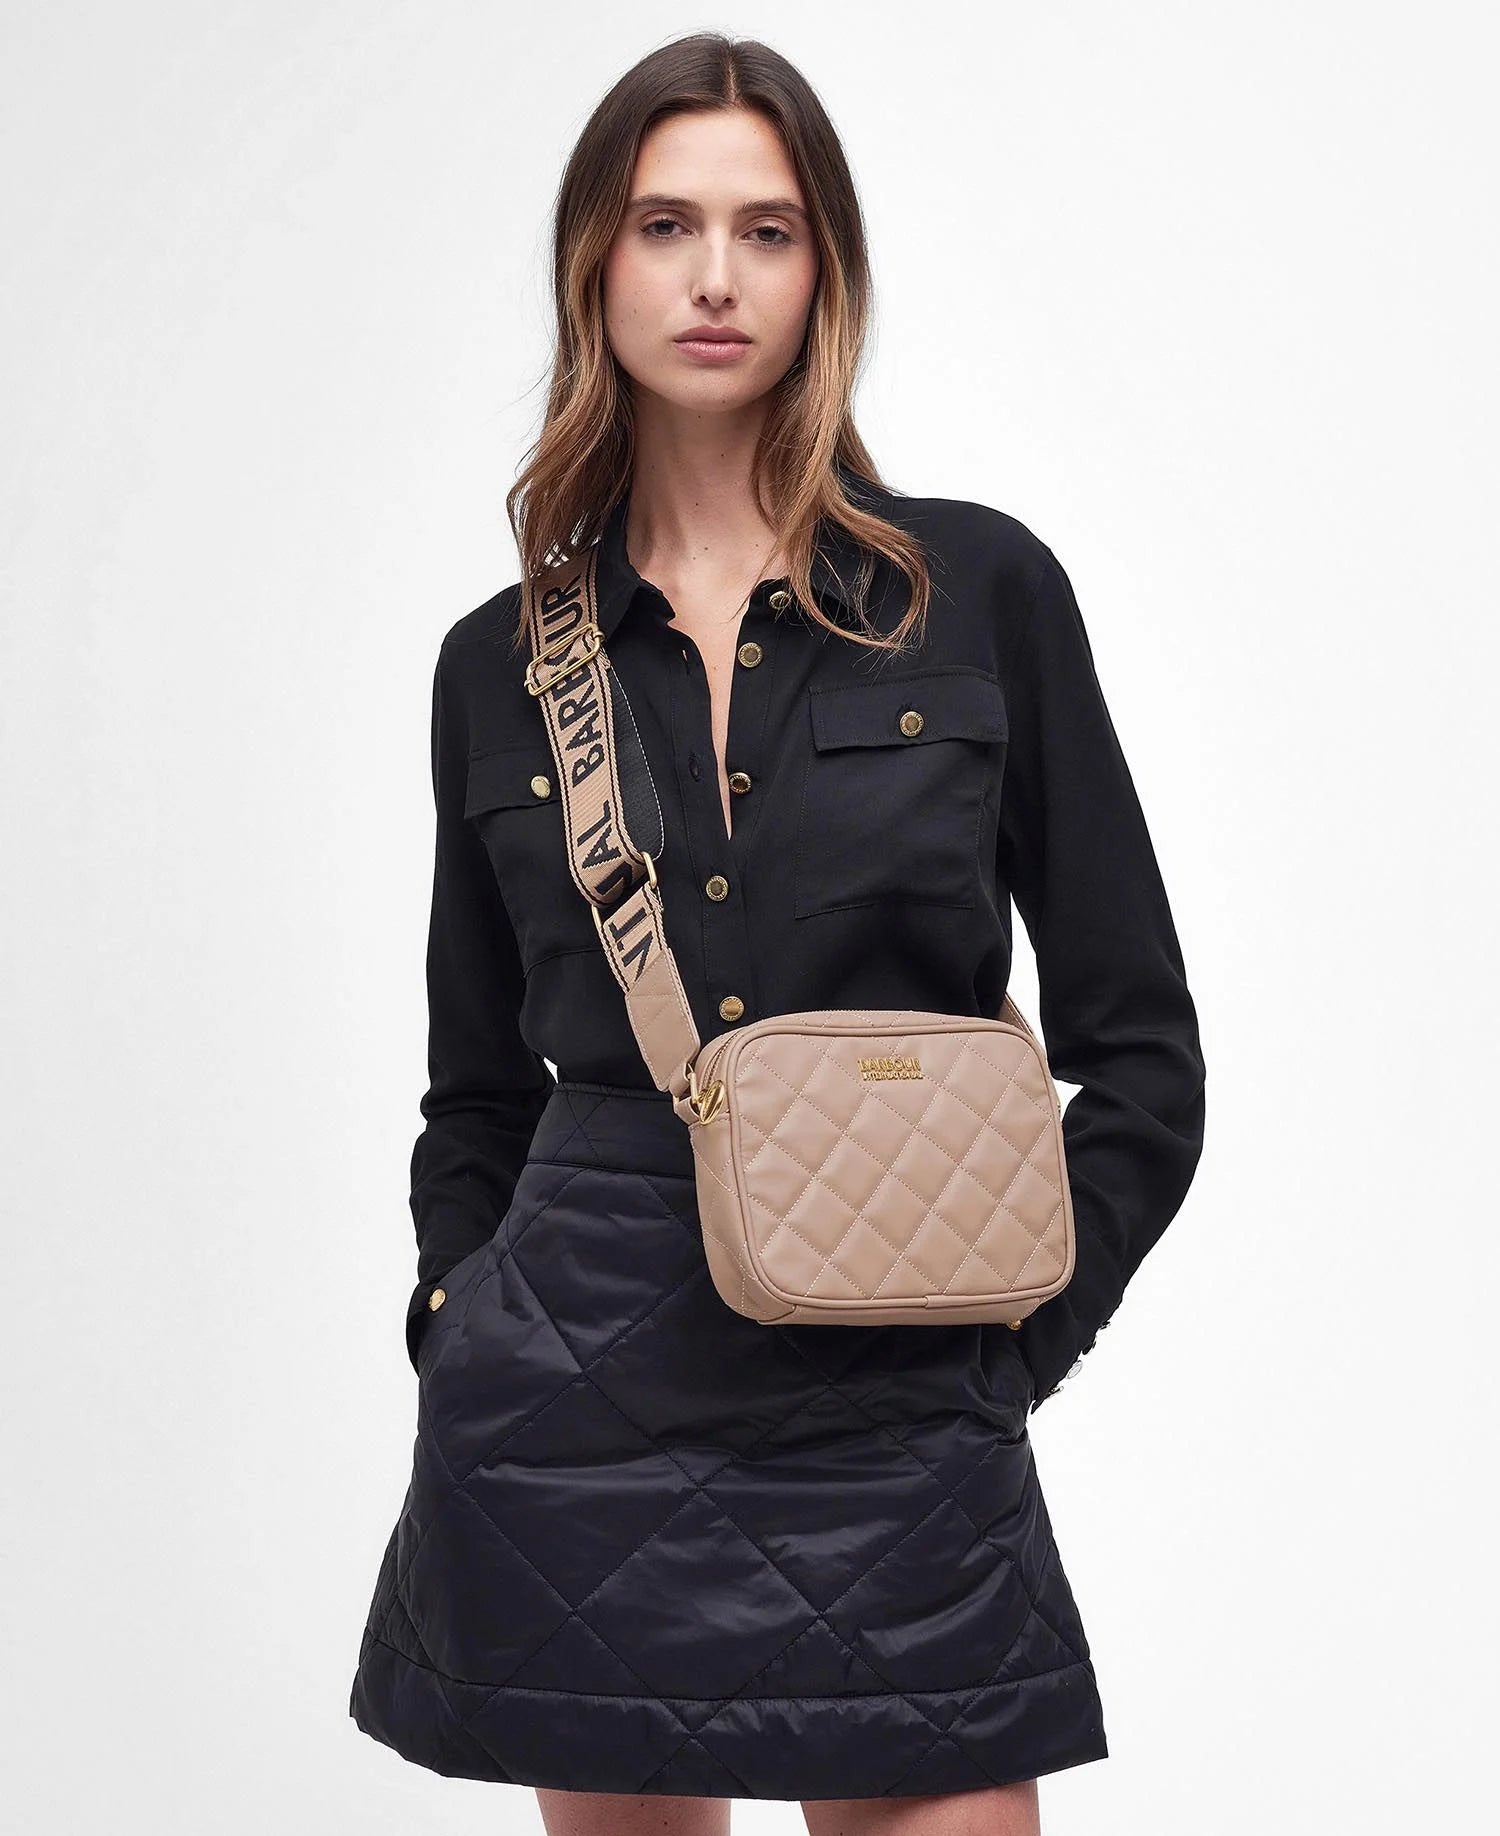 Barbour International Quilted Sloane Crossbody